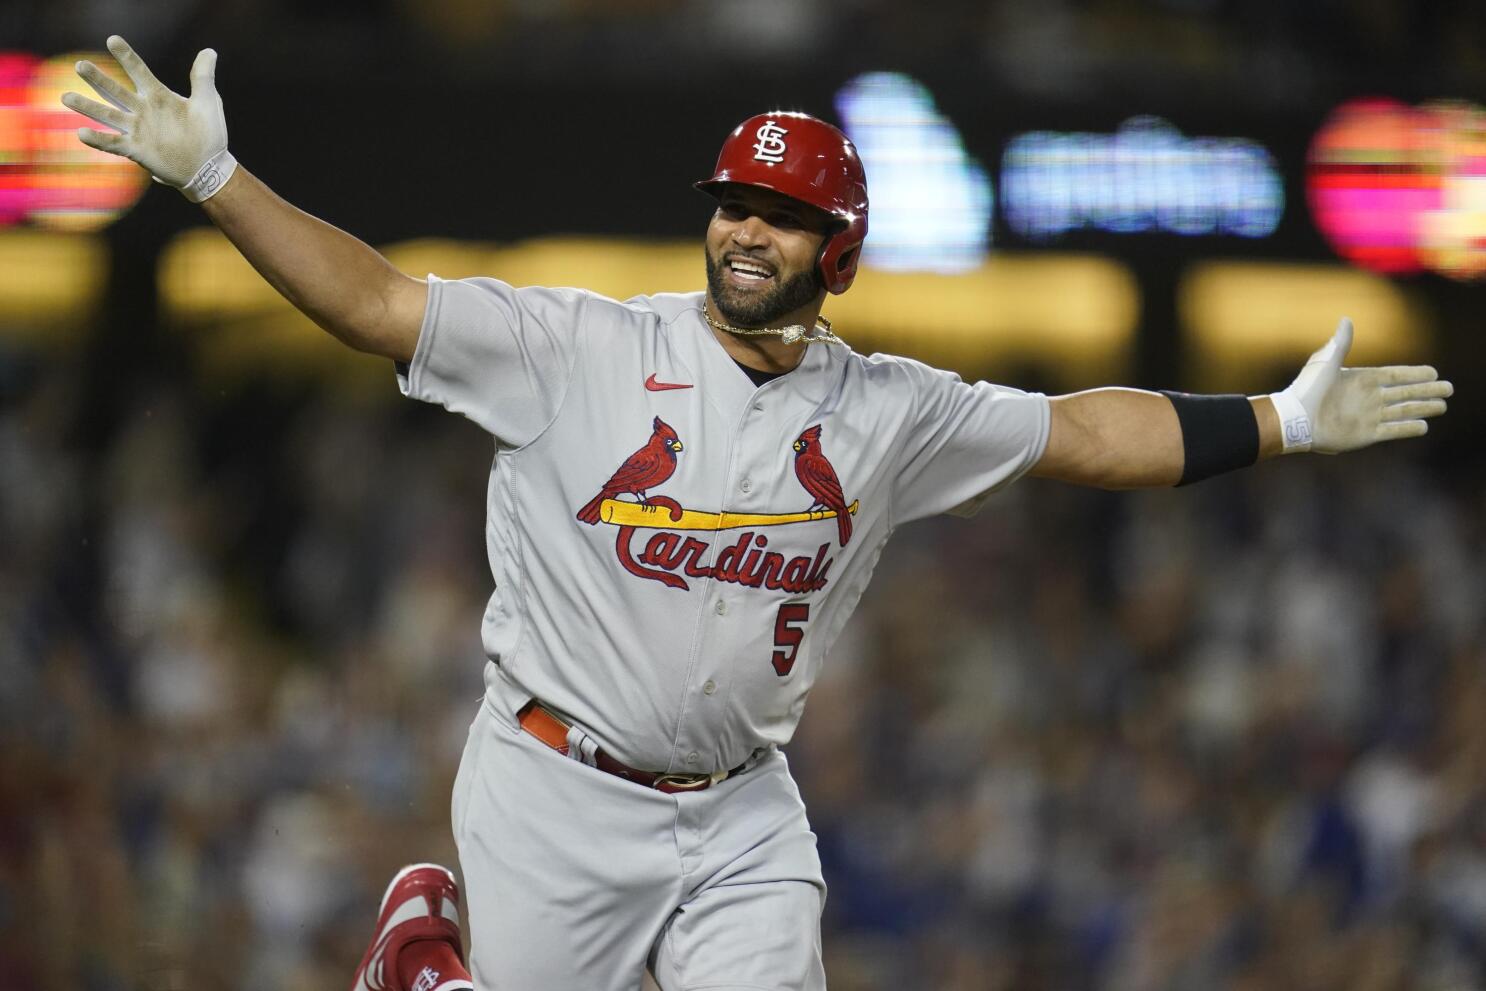 Albert Pujols contract: Future Hall of Famer signs back with